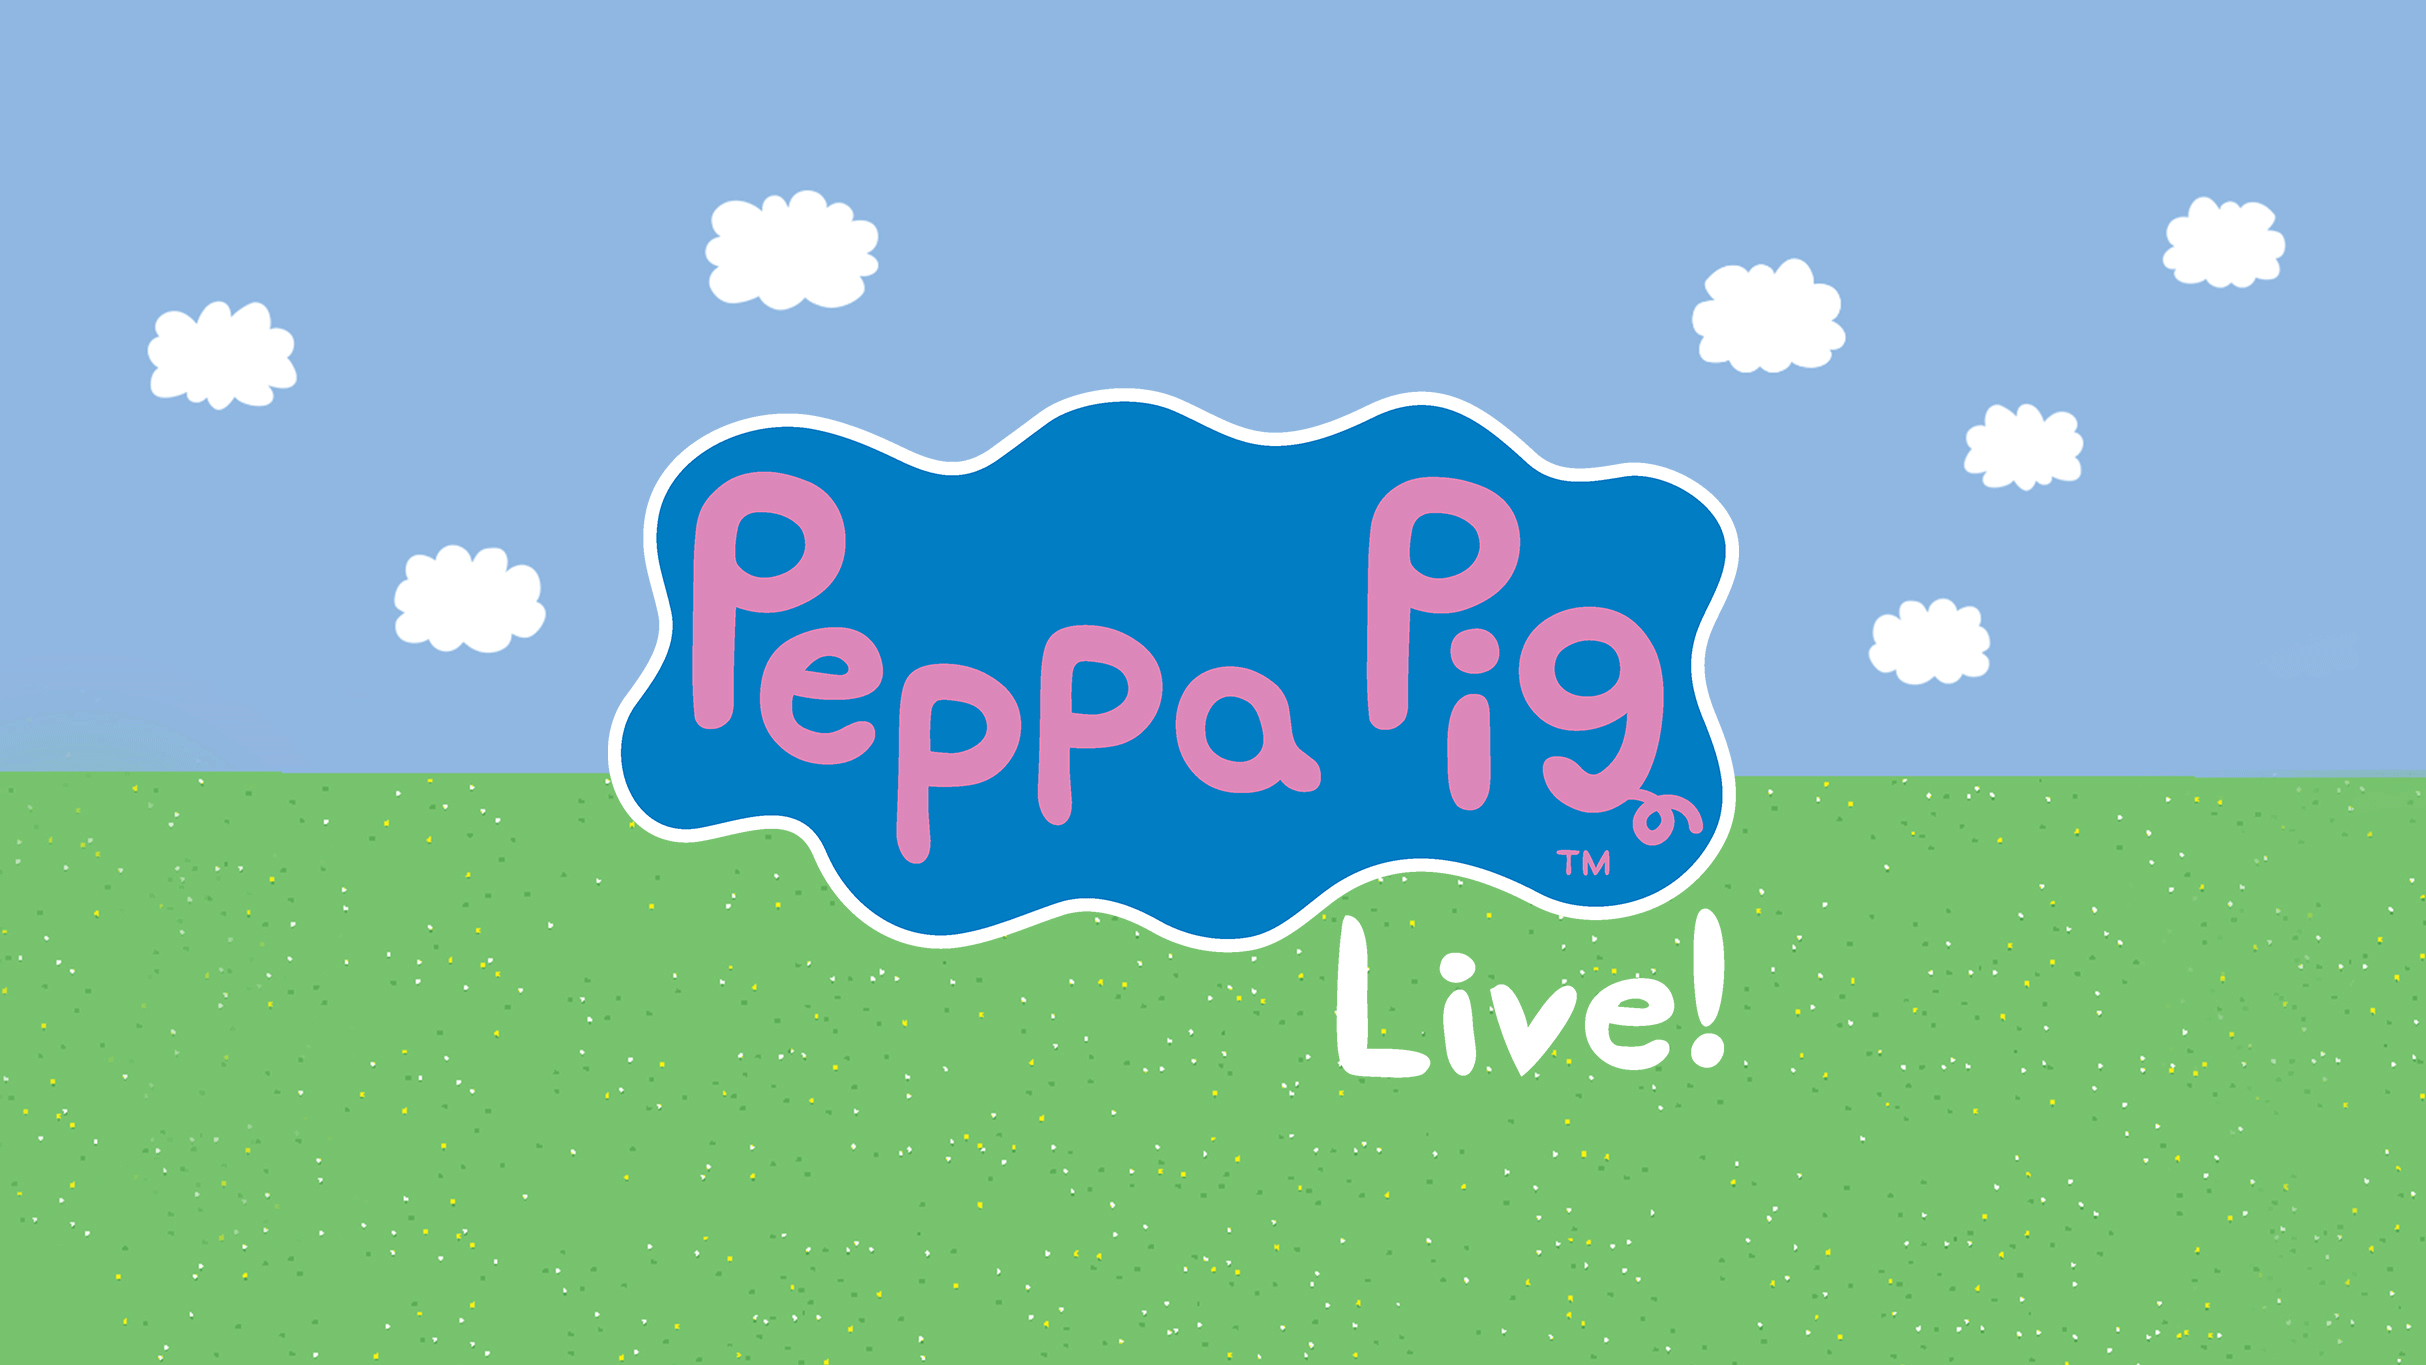 Peppa Pig's Sing-Along Party! free presale passcode for early tickets in Reno